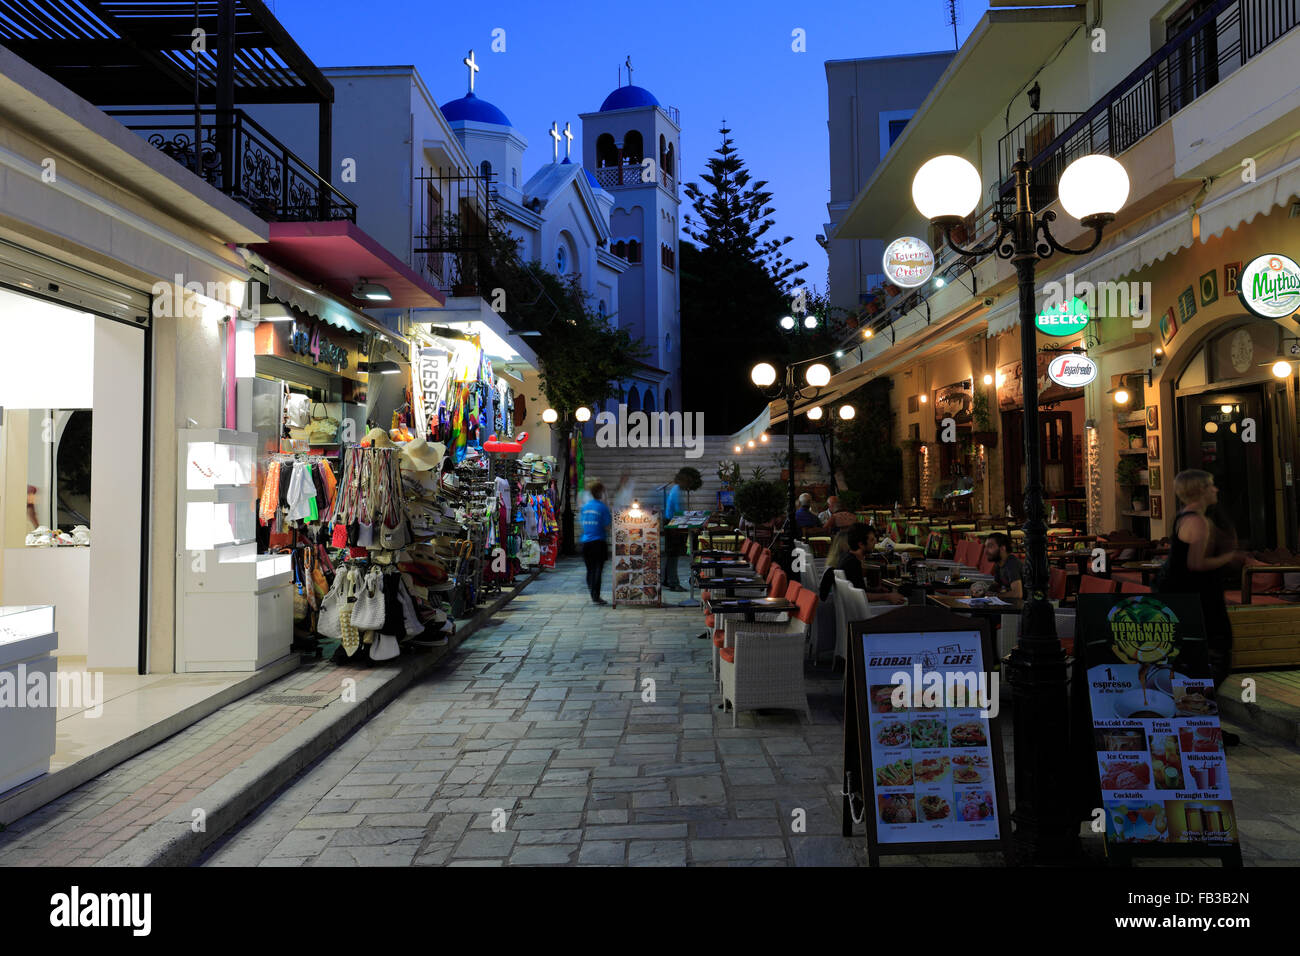 People shopping at night, Kos town, Kos Island, Dodecanese group of islands, South Aegean Sea, Greece. Stock Photo